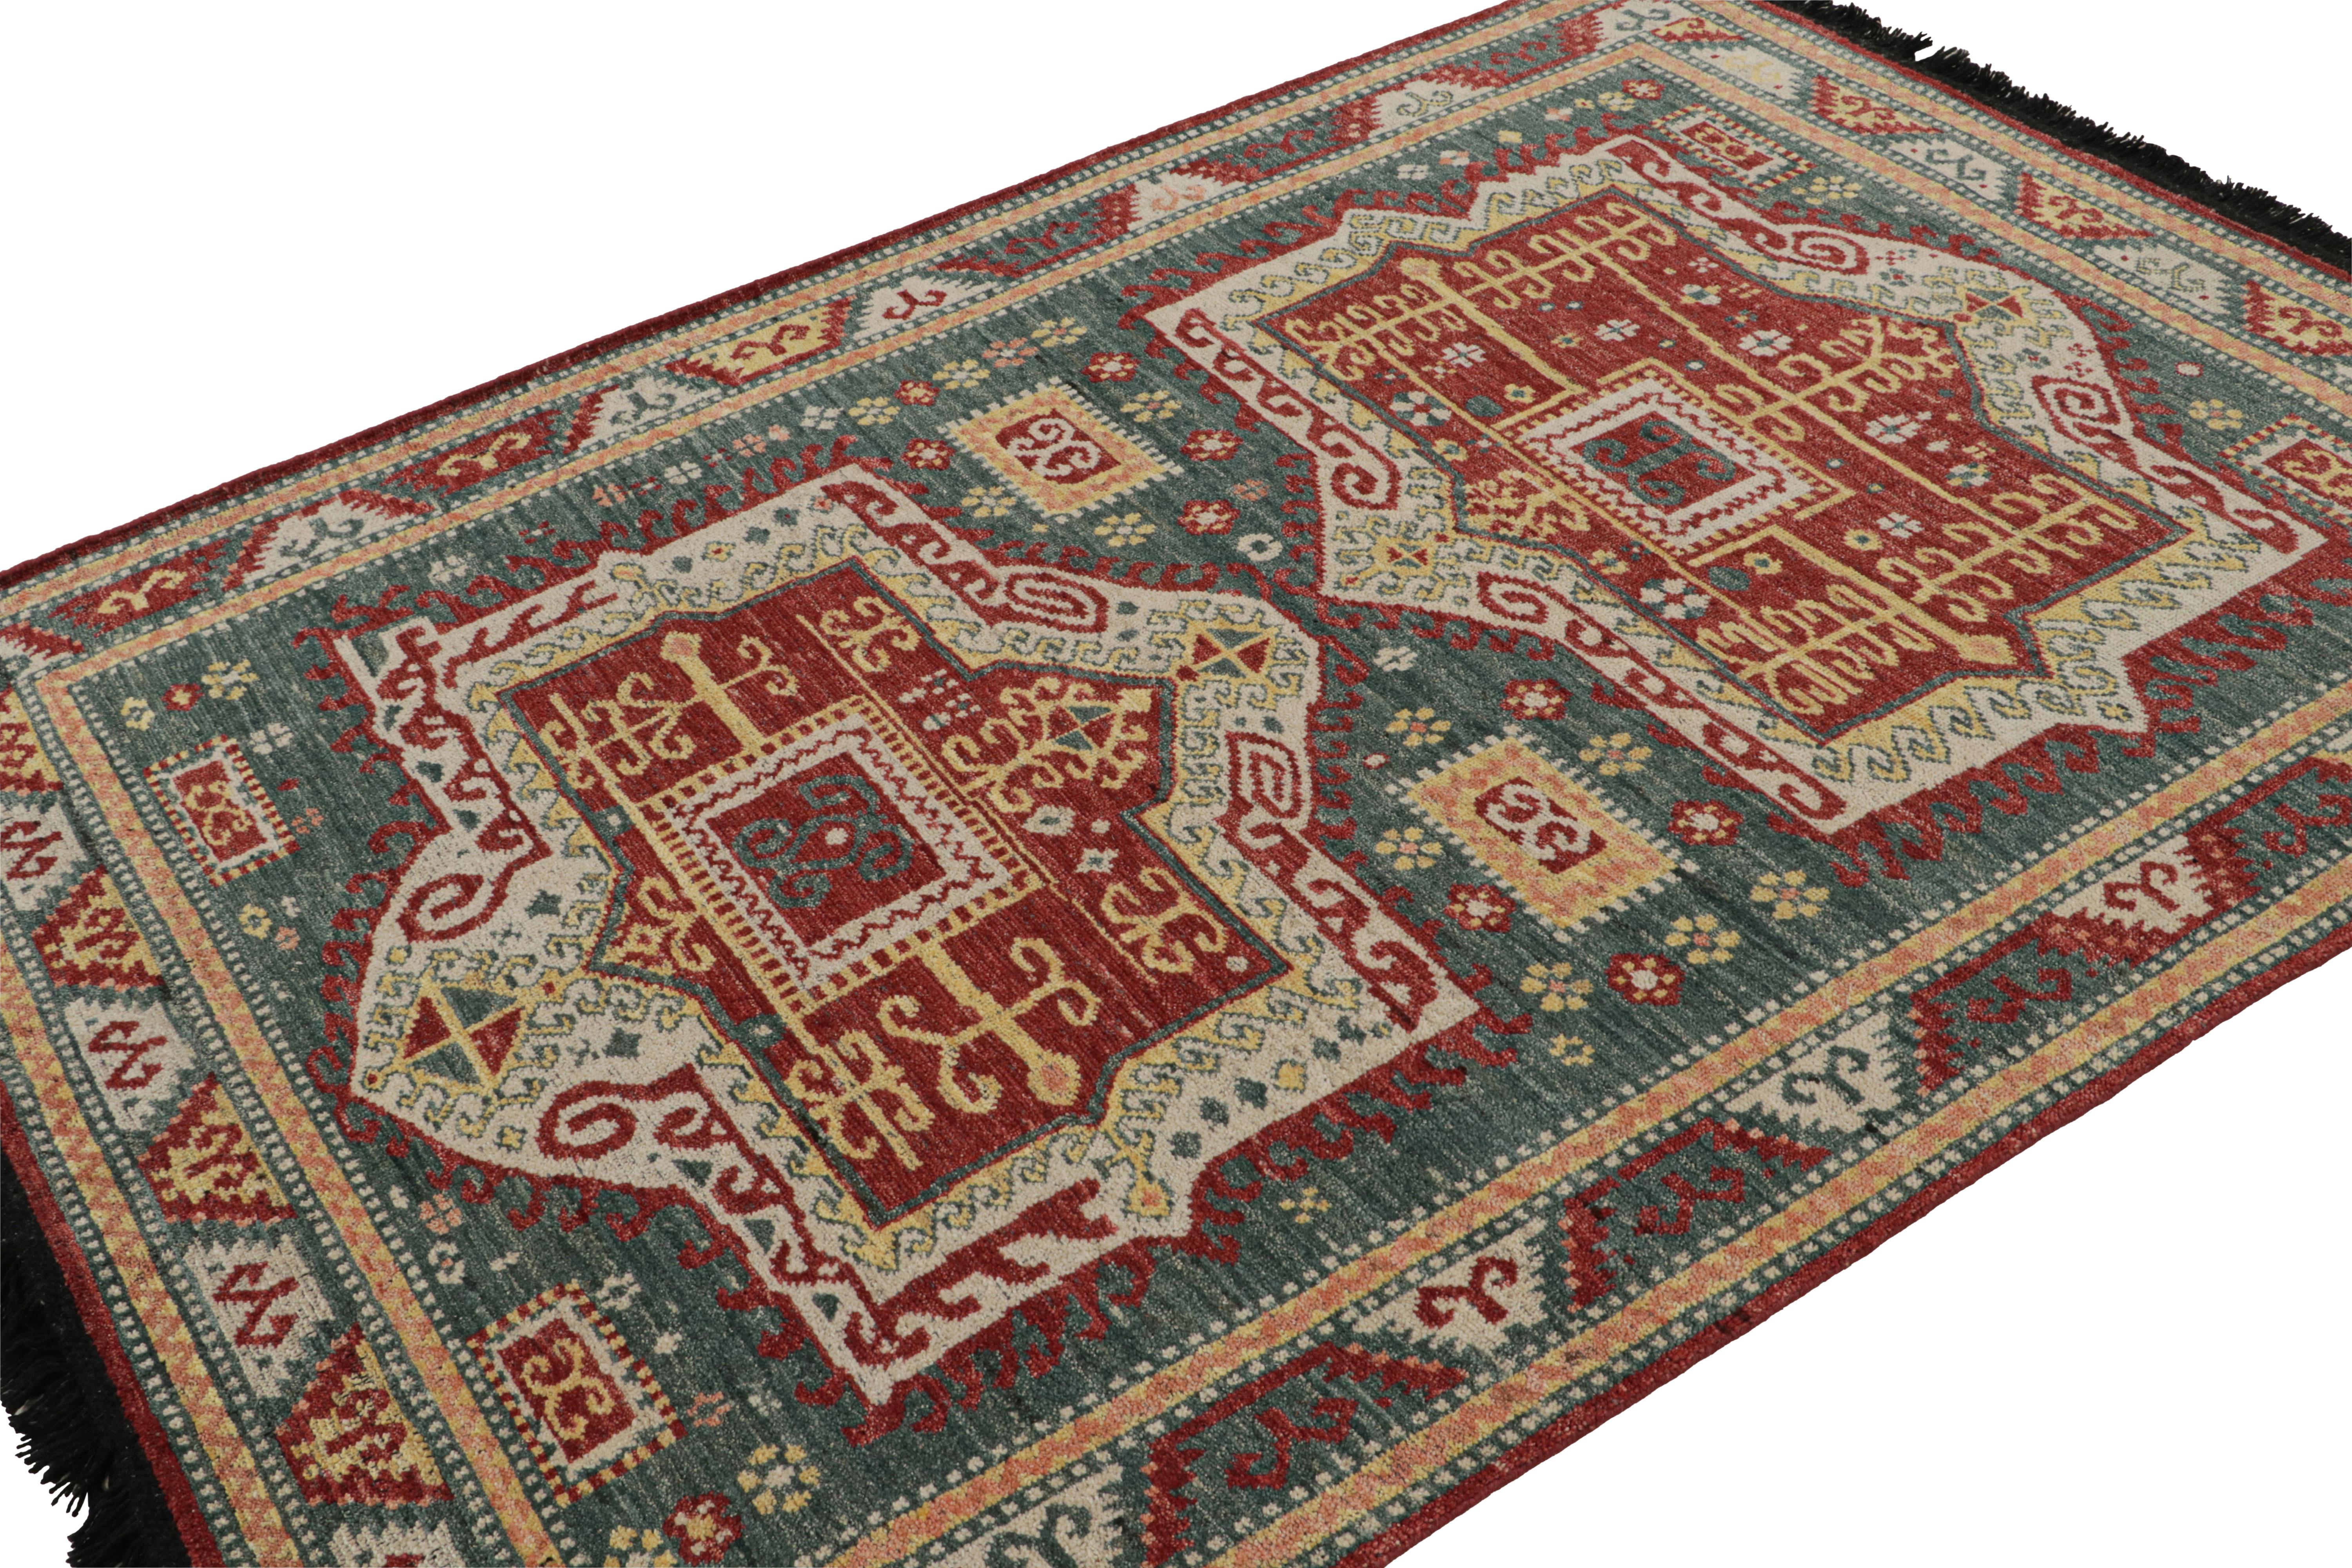 As inspired by antique Kazak rugs of rare designs, this 5x7 modern architectural rug from our Burano collection is hand knotted in Ghazni wool. 

On the Design: 

Hand-knotted in the softest quality wool, this 5x7 rug joins the classic styles of our